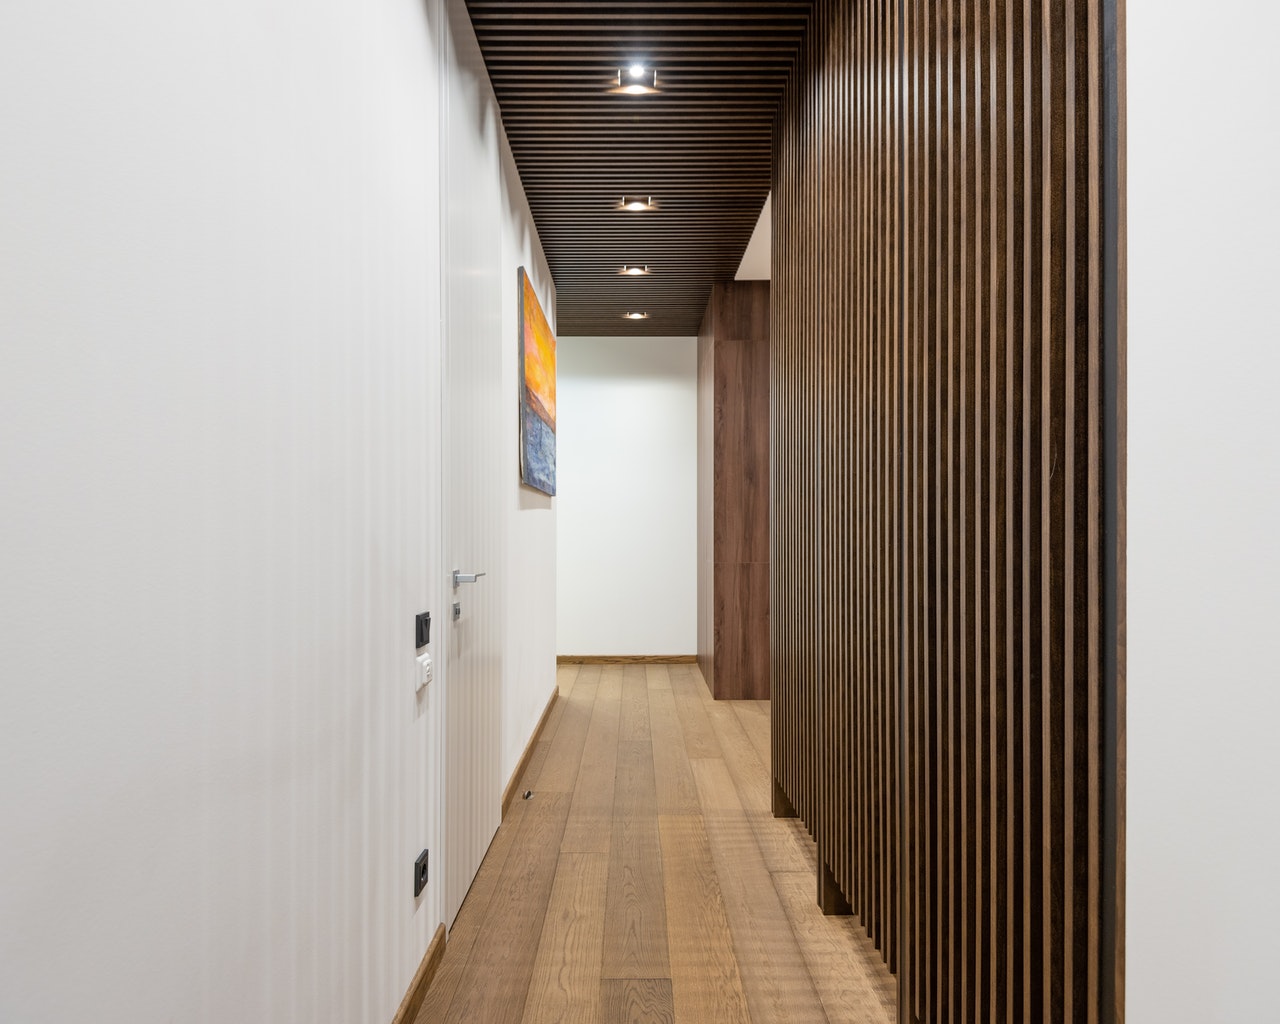 The best narrow hallway ideas to transform tight spaces | Homebuilding